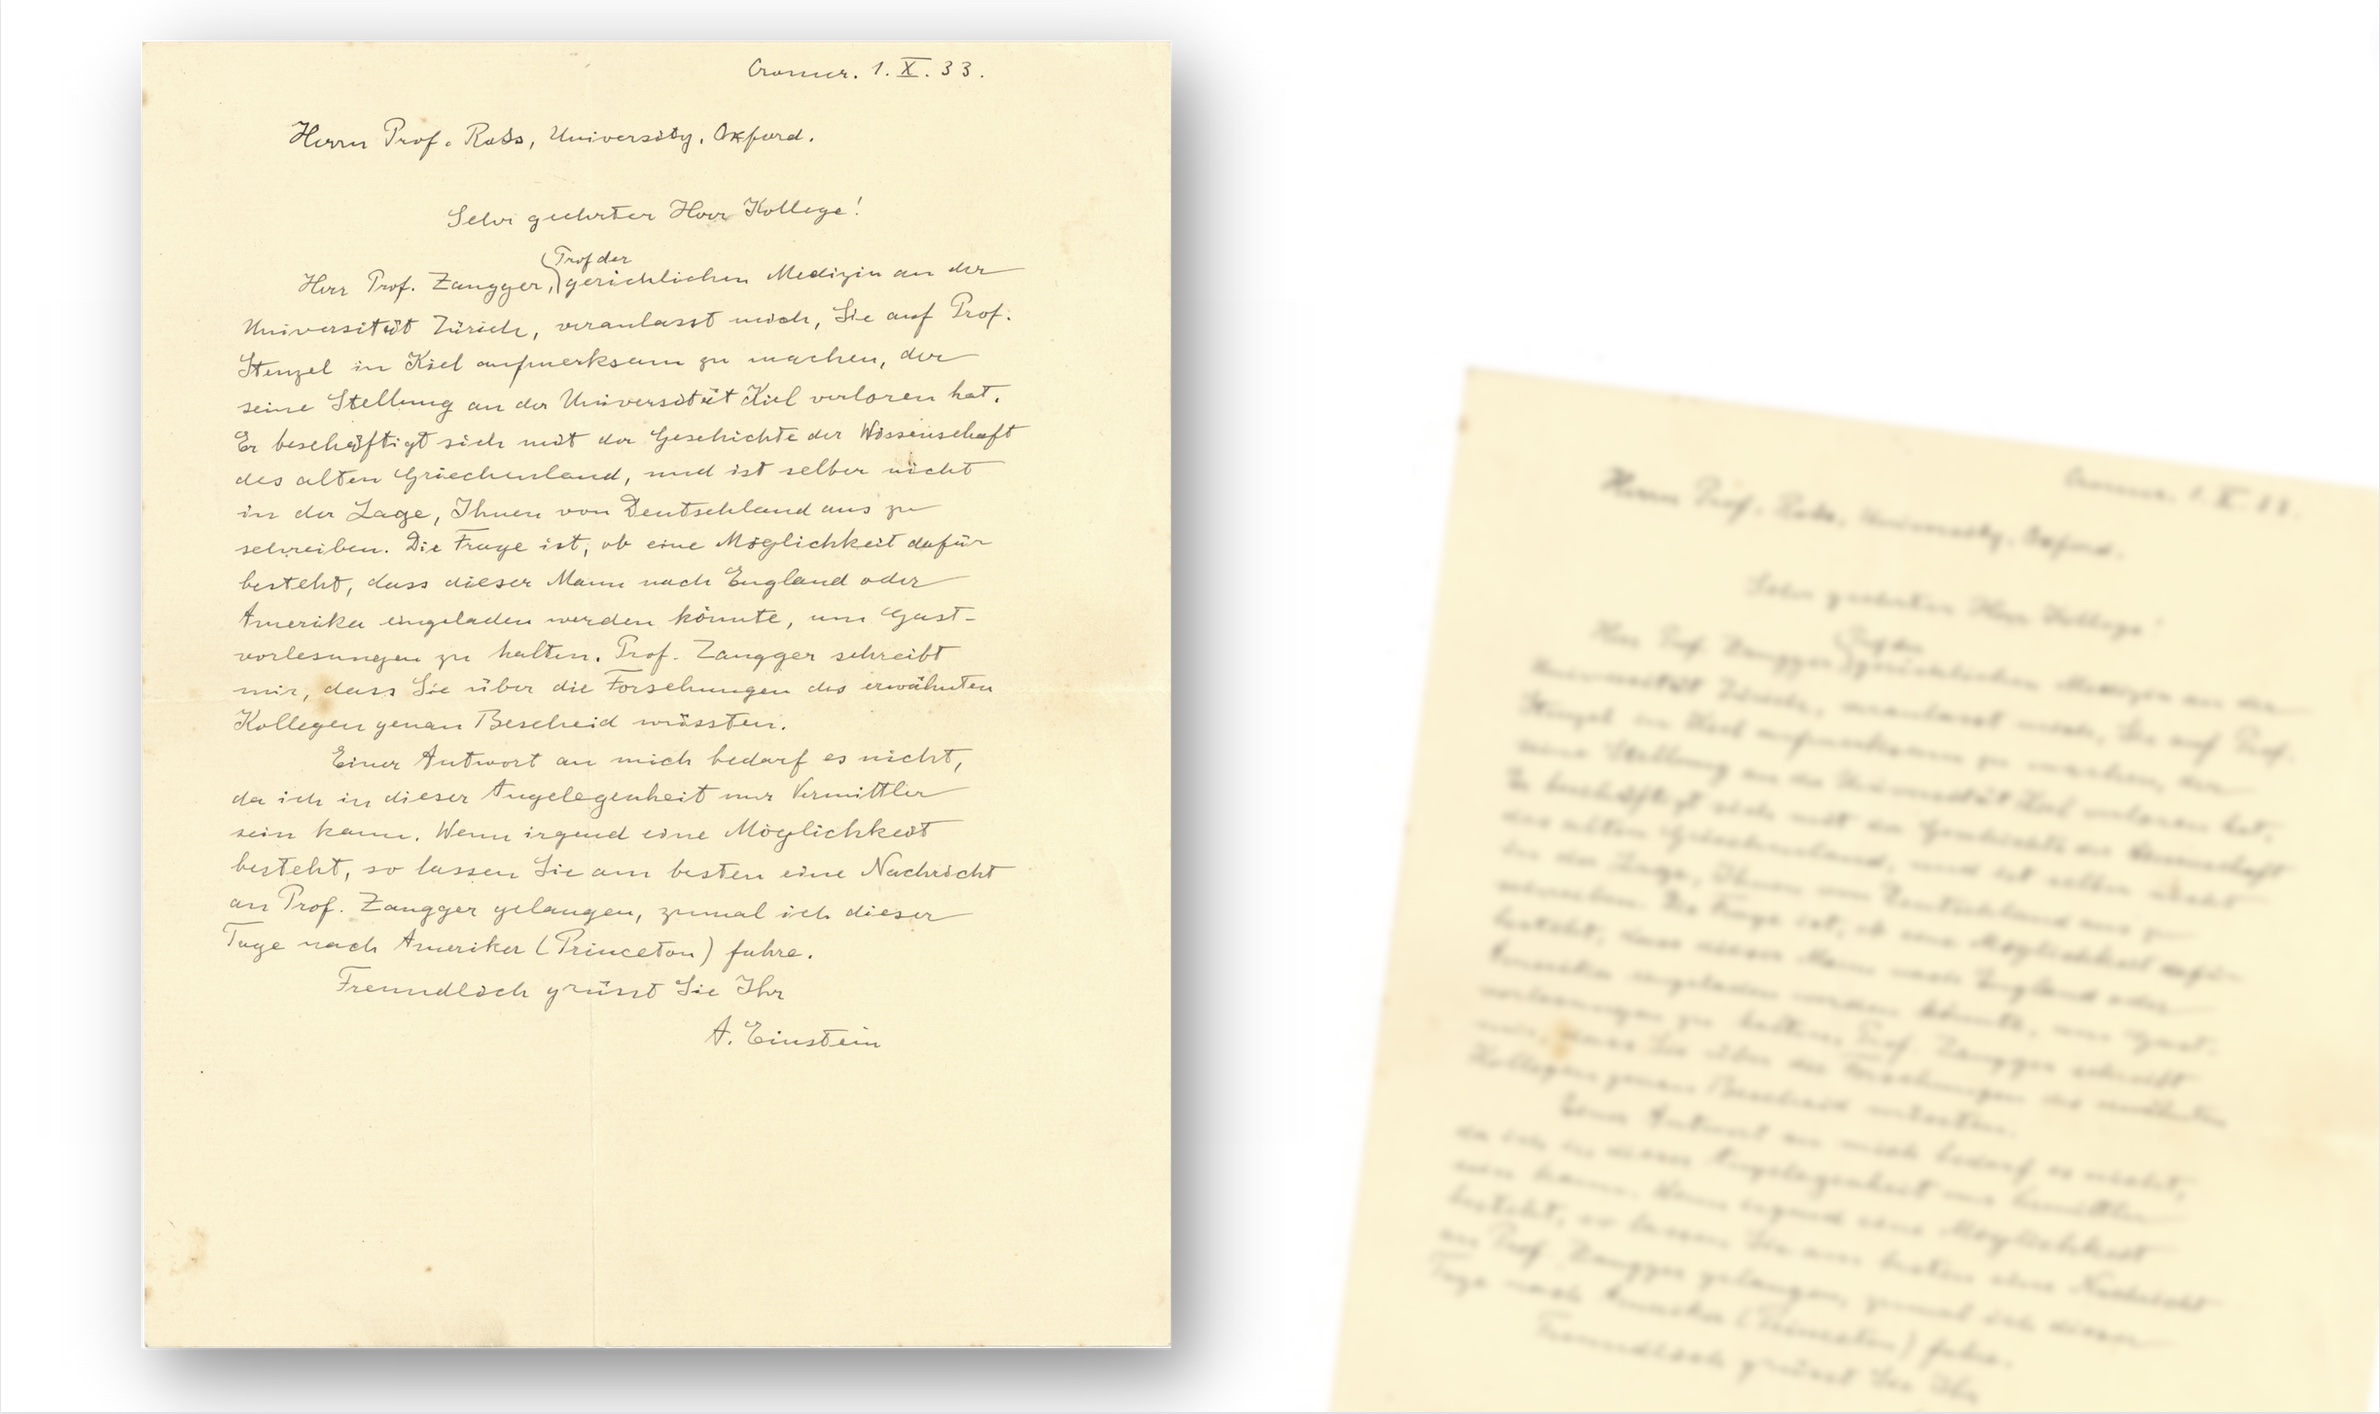 Albert Einstein letter sells for charity – Antique Collecting